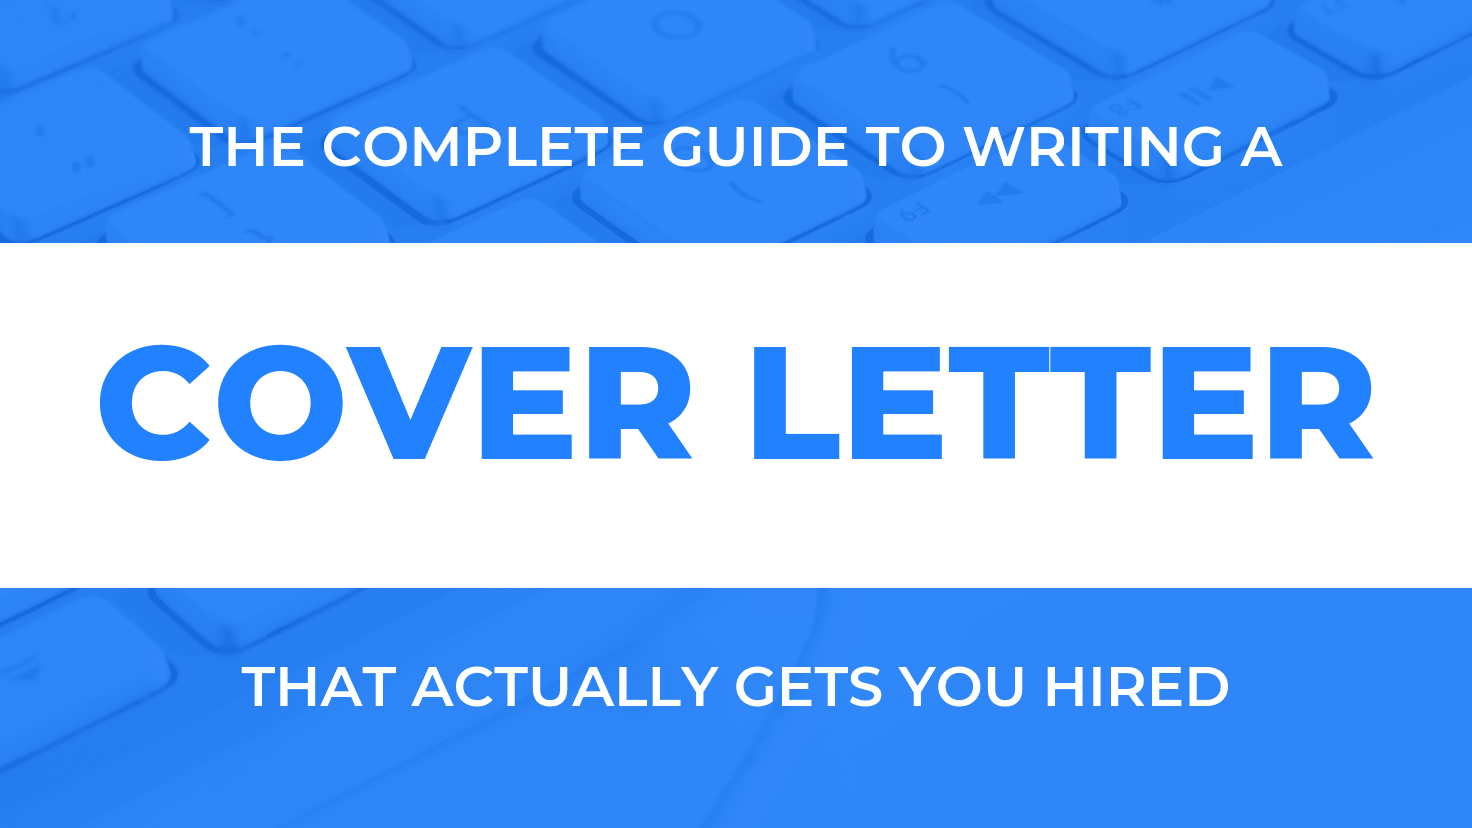 Capitalize To Whom It May Concern In Cover Letter from cultivatedculture.com